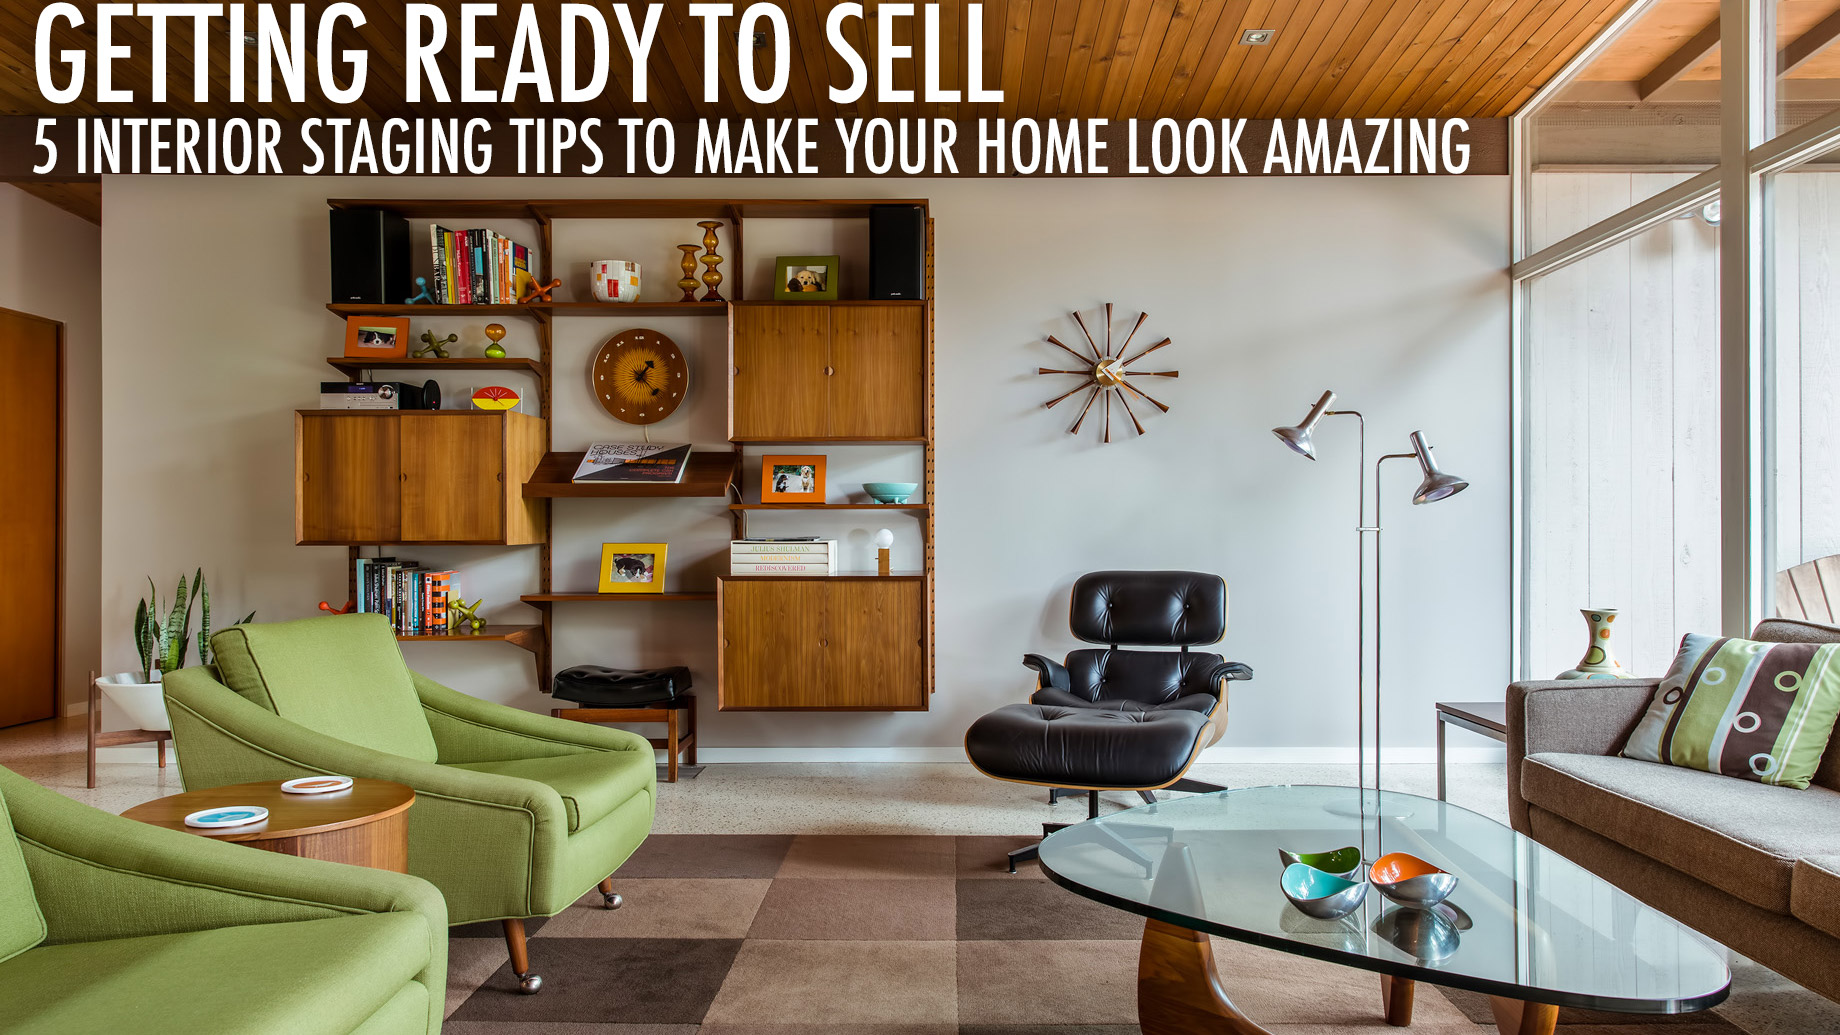 Getting Ready to Sell - 5 Interior Staging Tips To Make Your Home Look Amazing